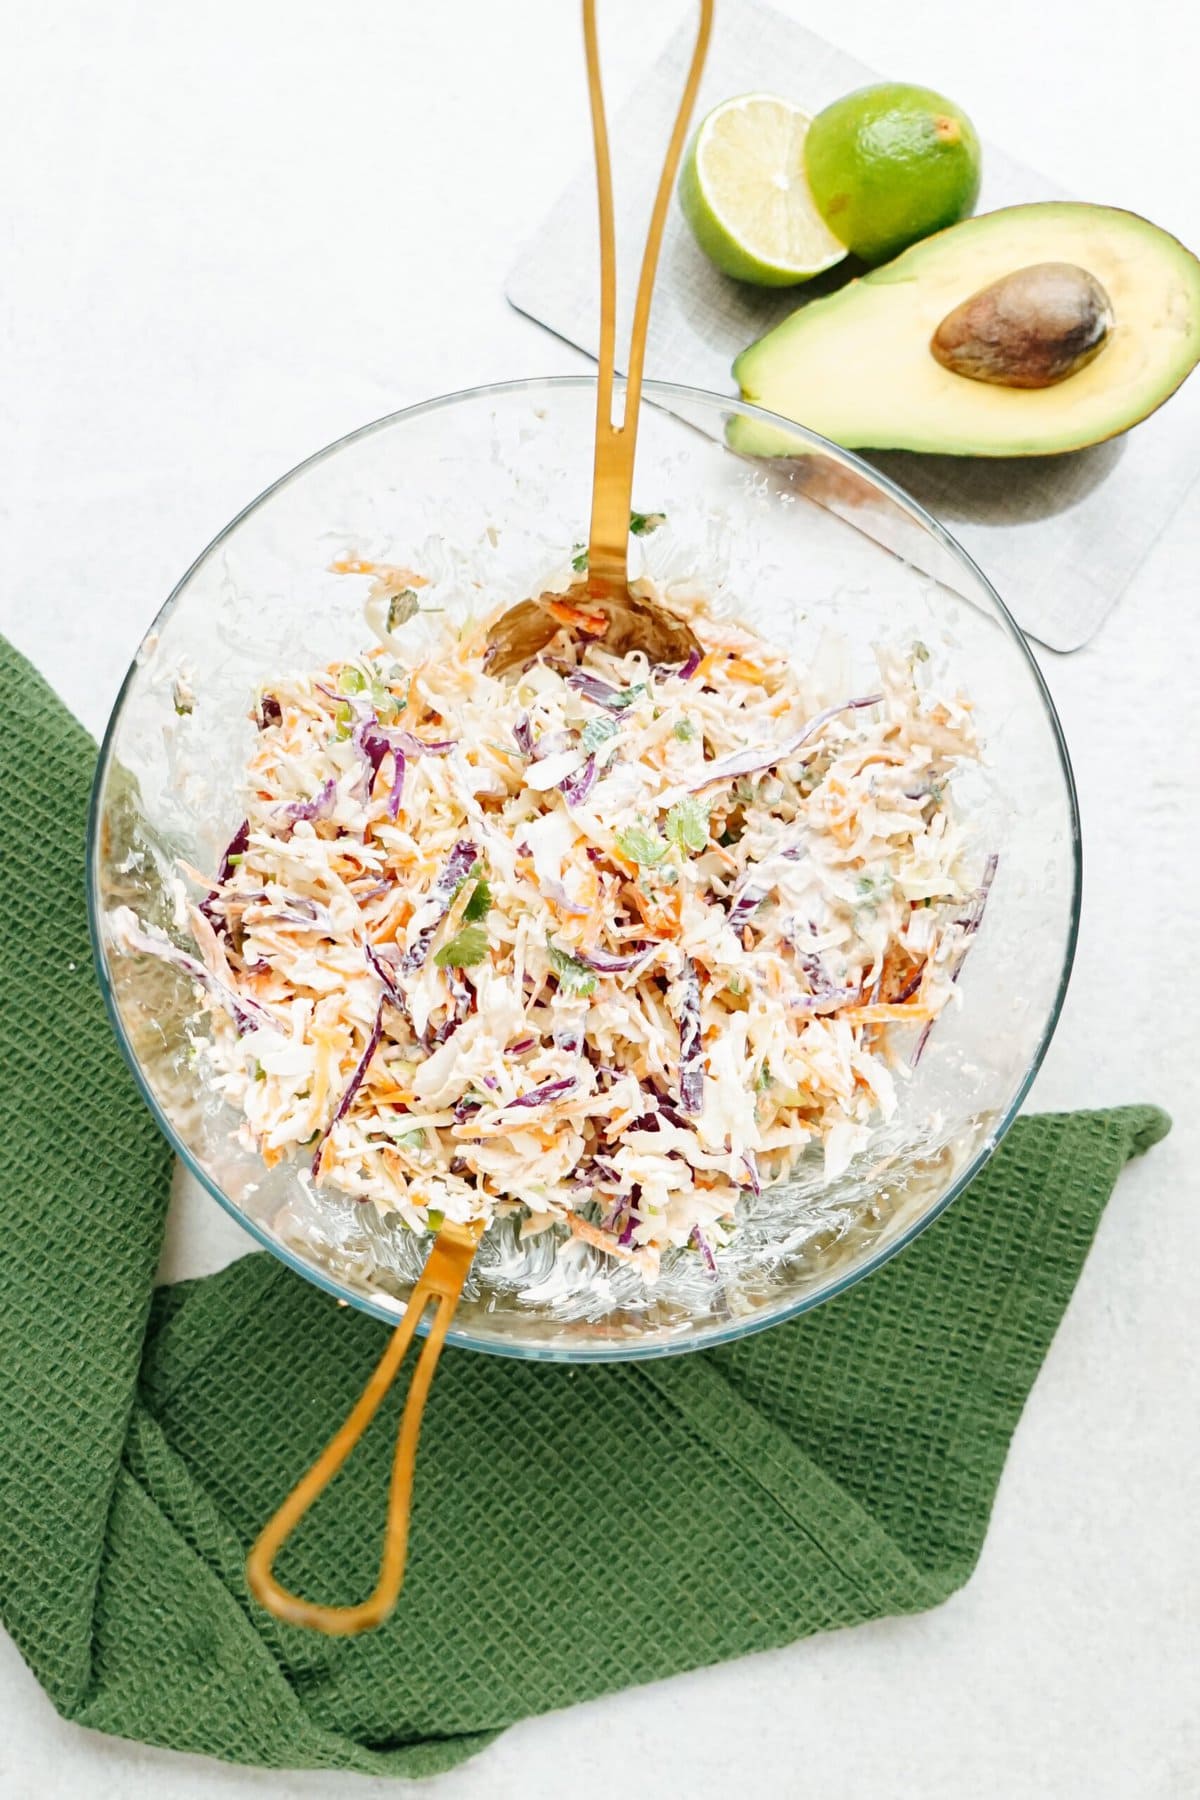 A glass bowl of coleslaw with serving utensils, accompanied by lime slices and an avocado on a kitchen countertop, ready to garnish fish tacos.